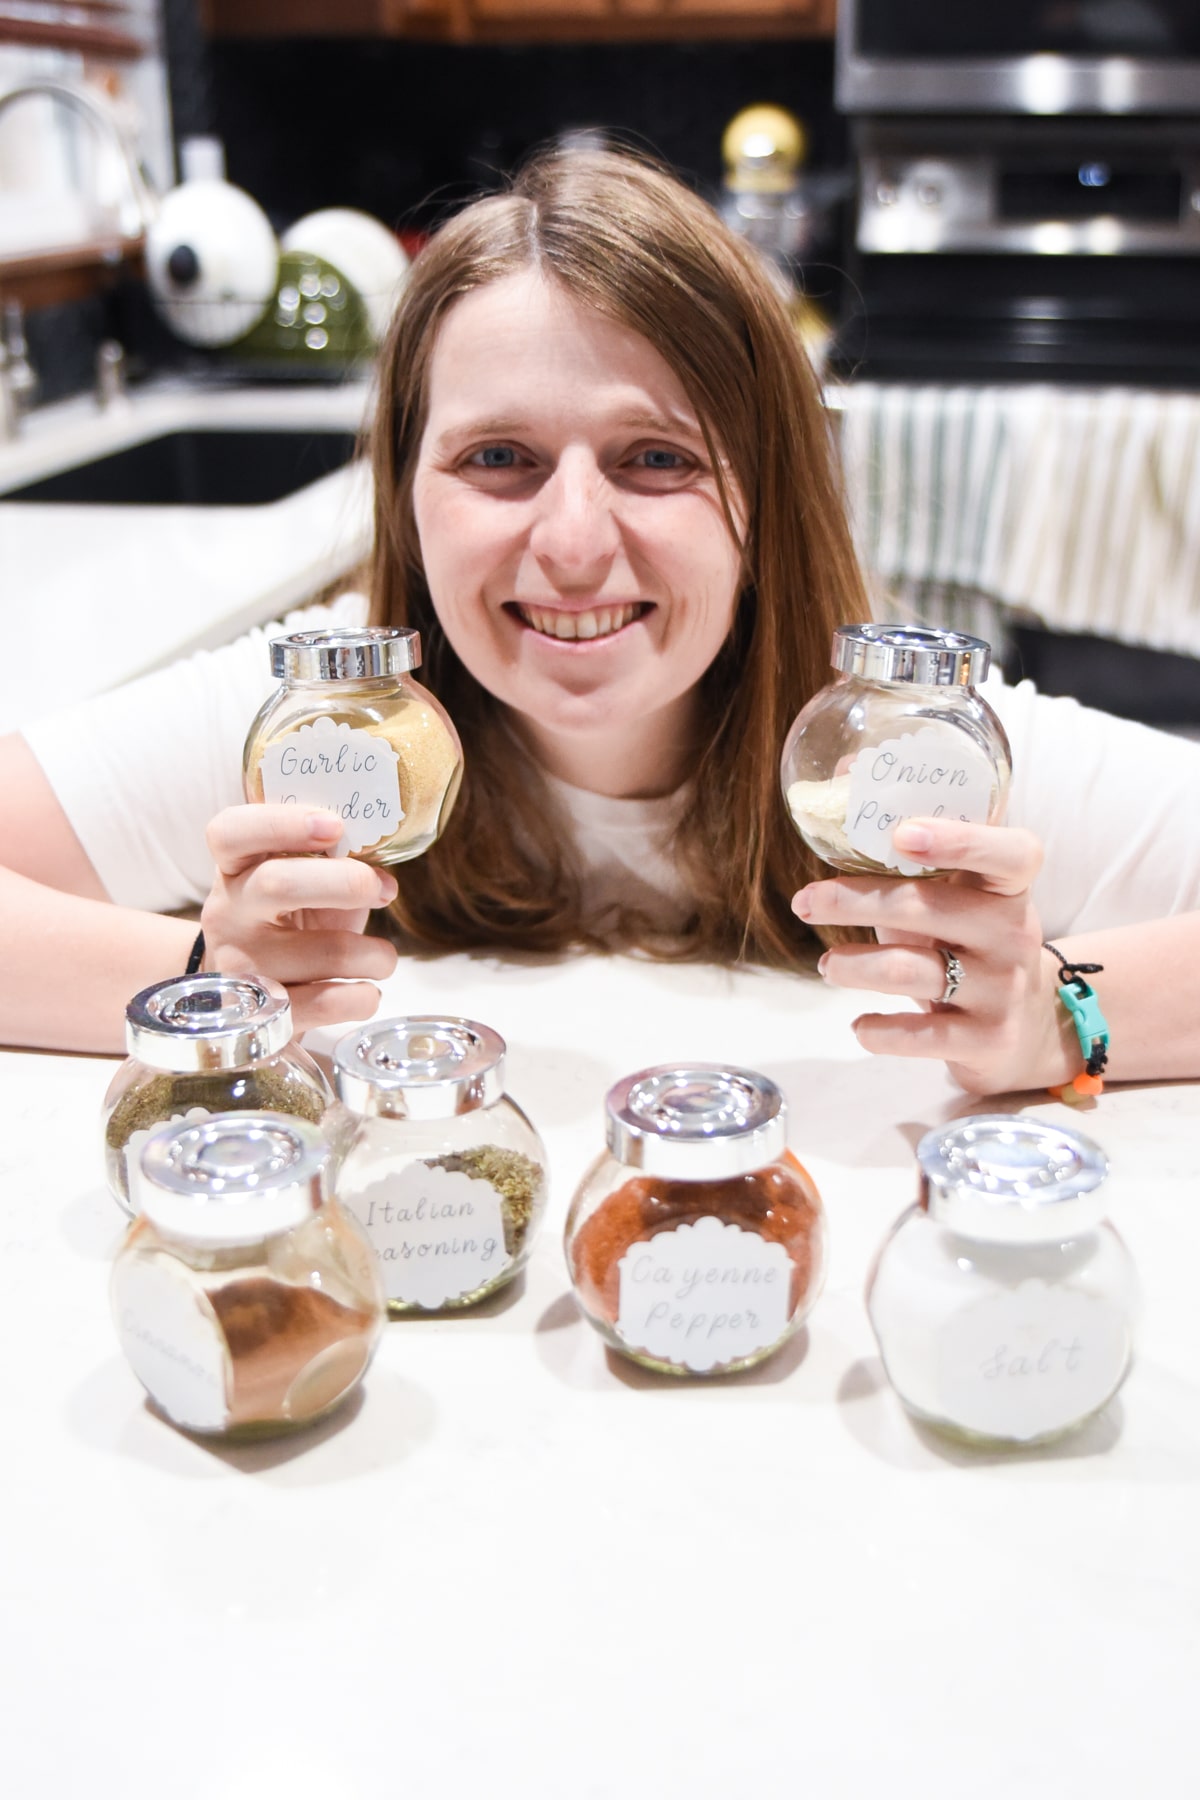 A woman holding spice jars